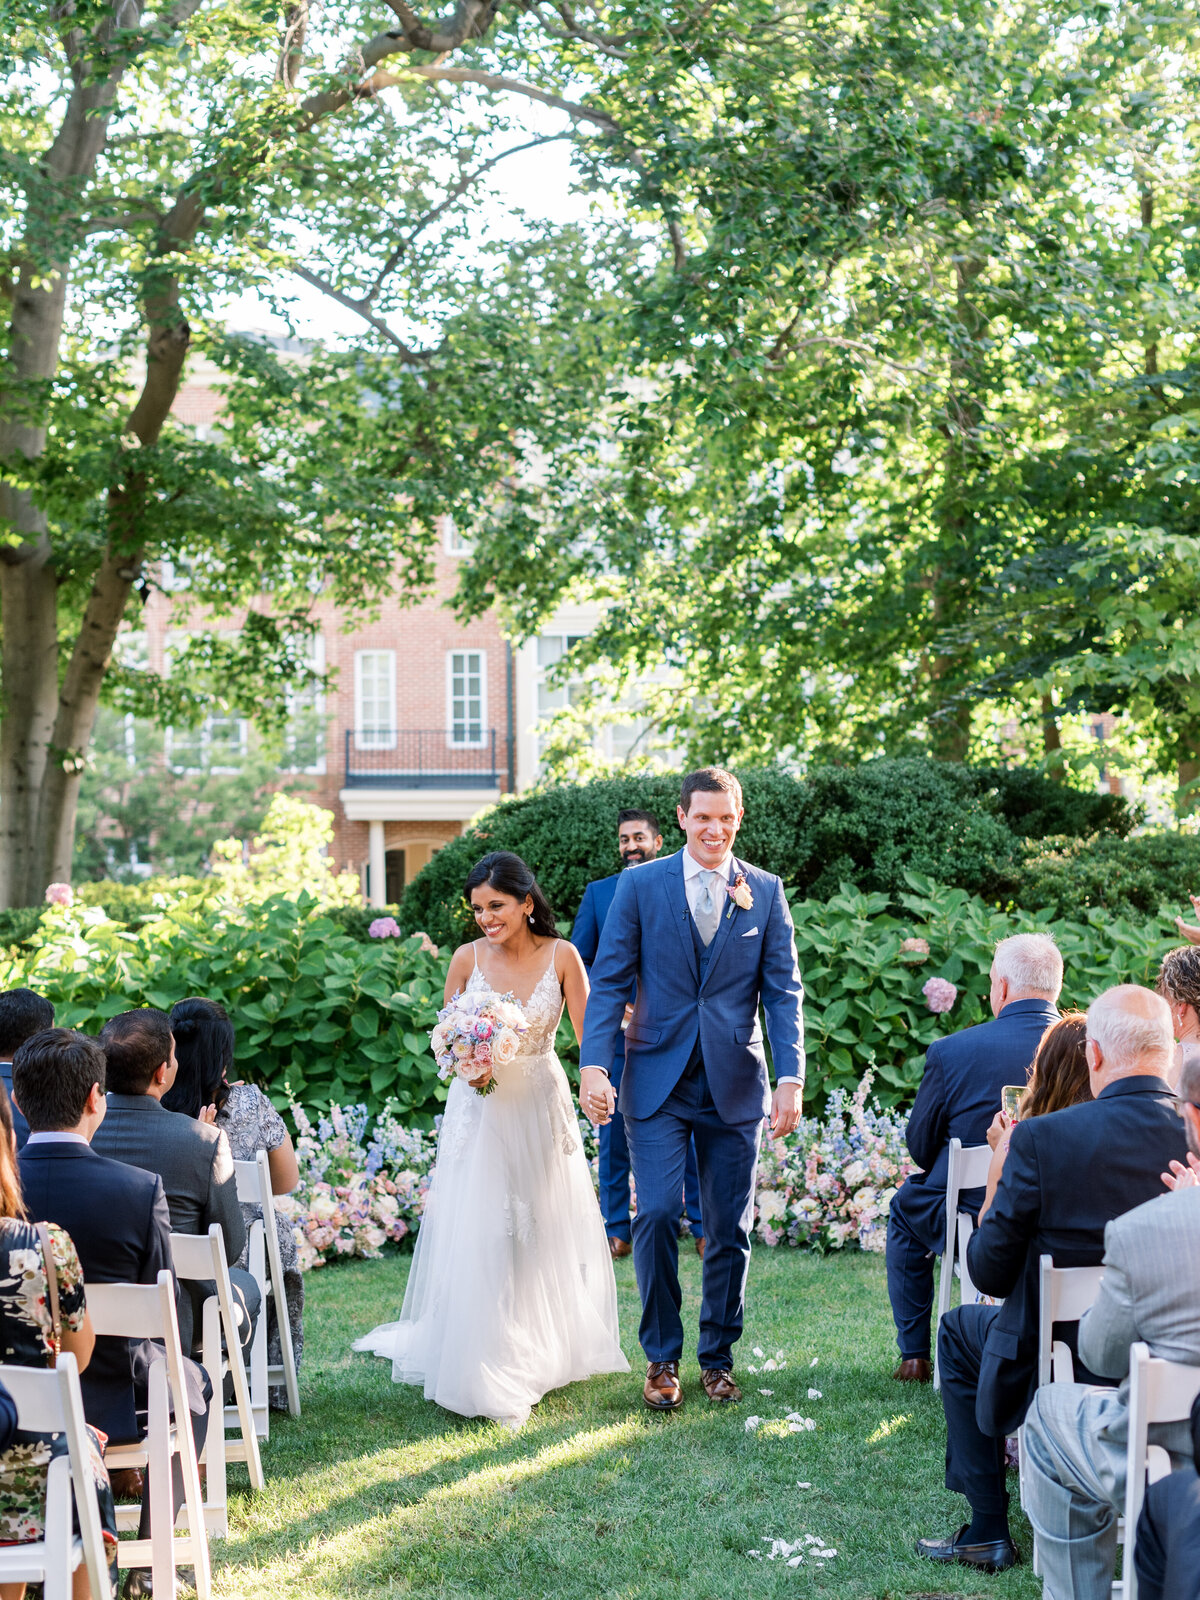 Brielle-davis-events-meridian-house-summer-wedding-ceremony-recessional